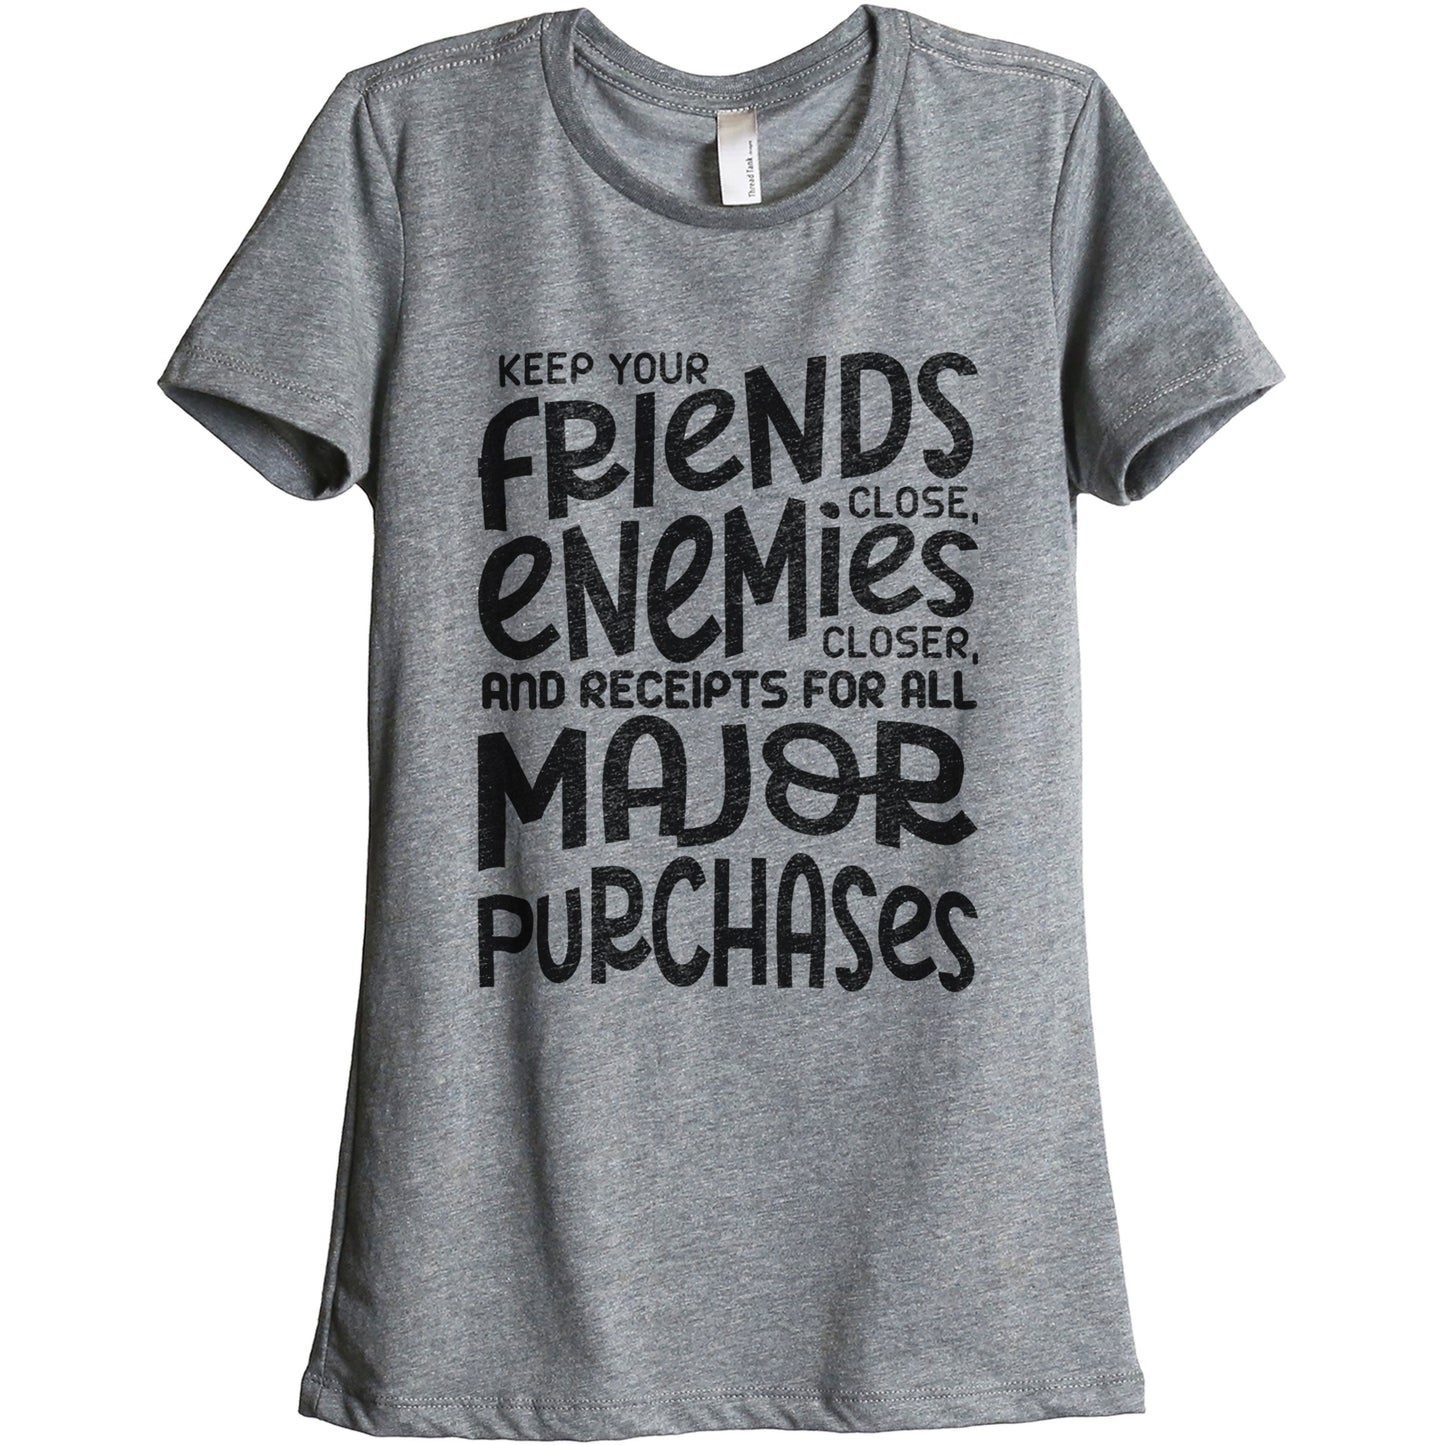 6. Keep Your Friends Close - Stories You Can Wear by Thread Tank